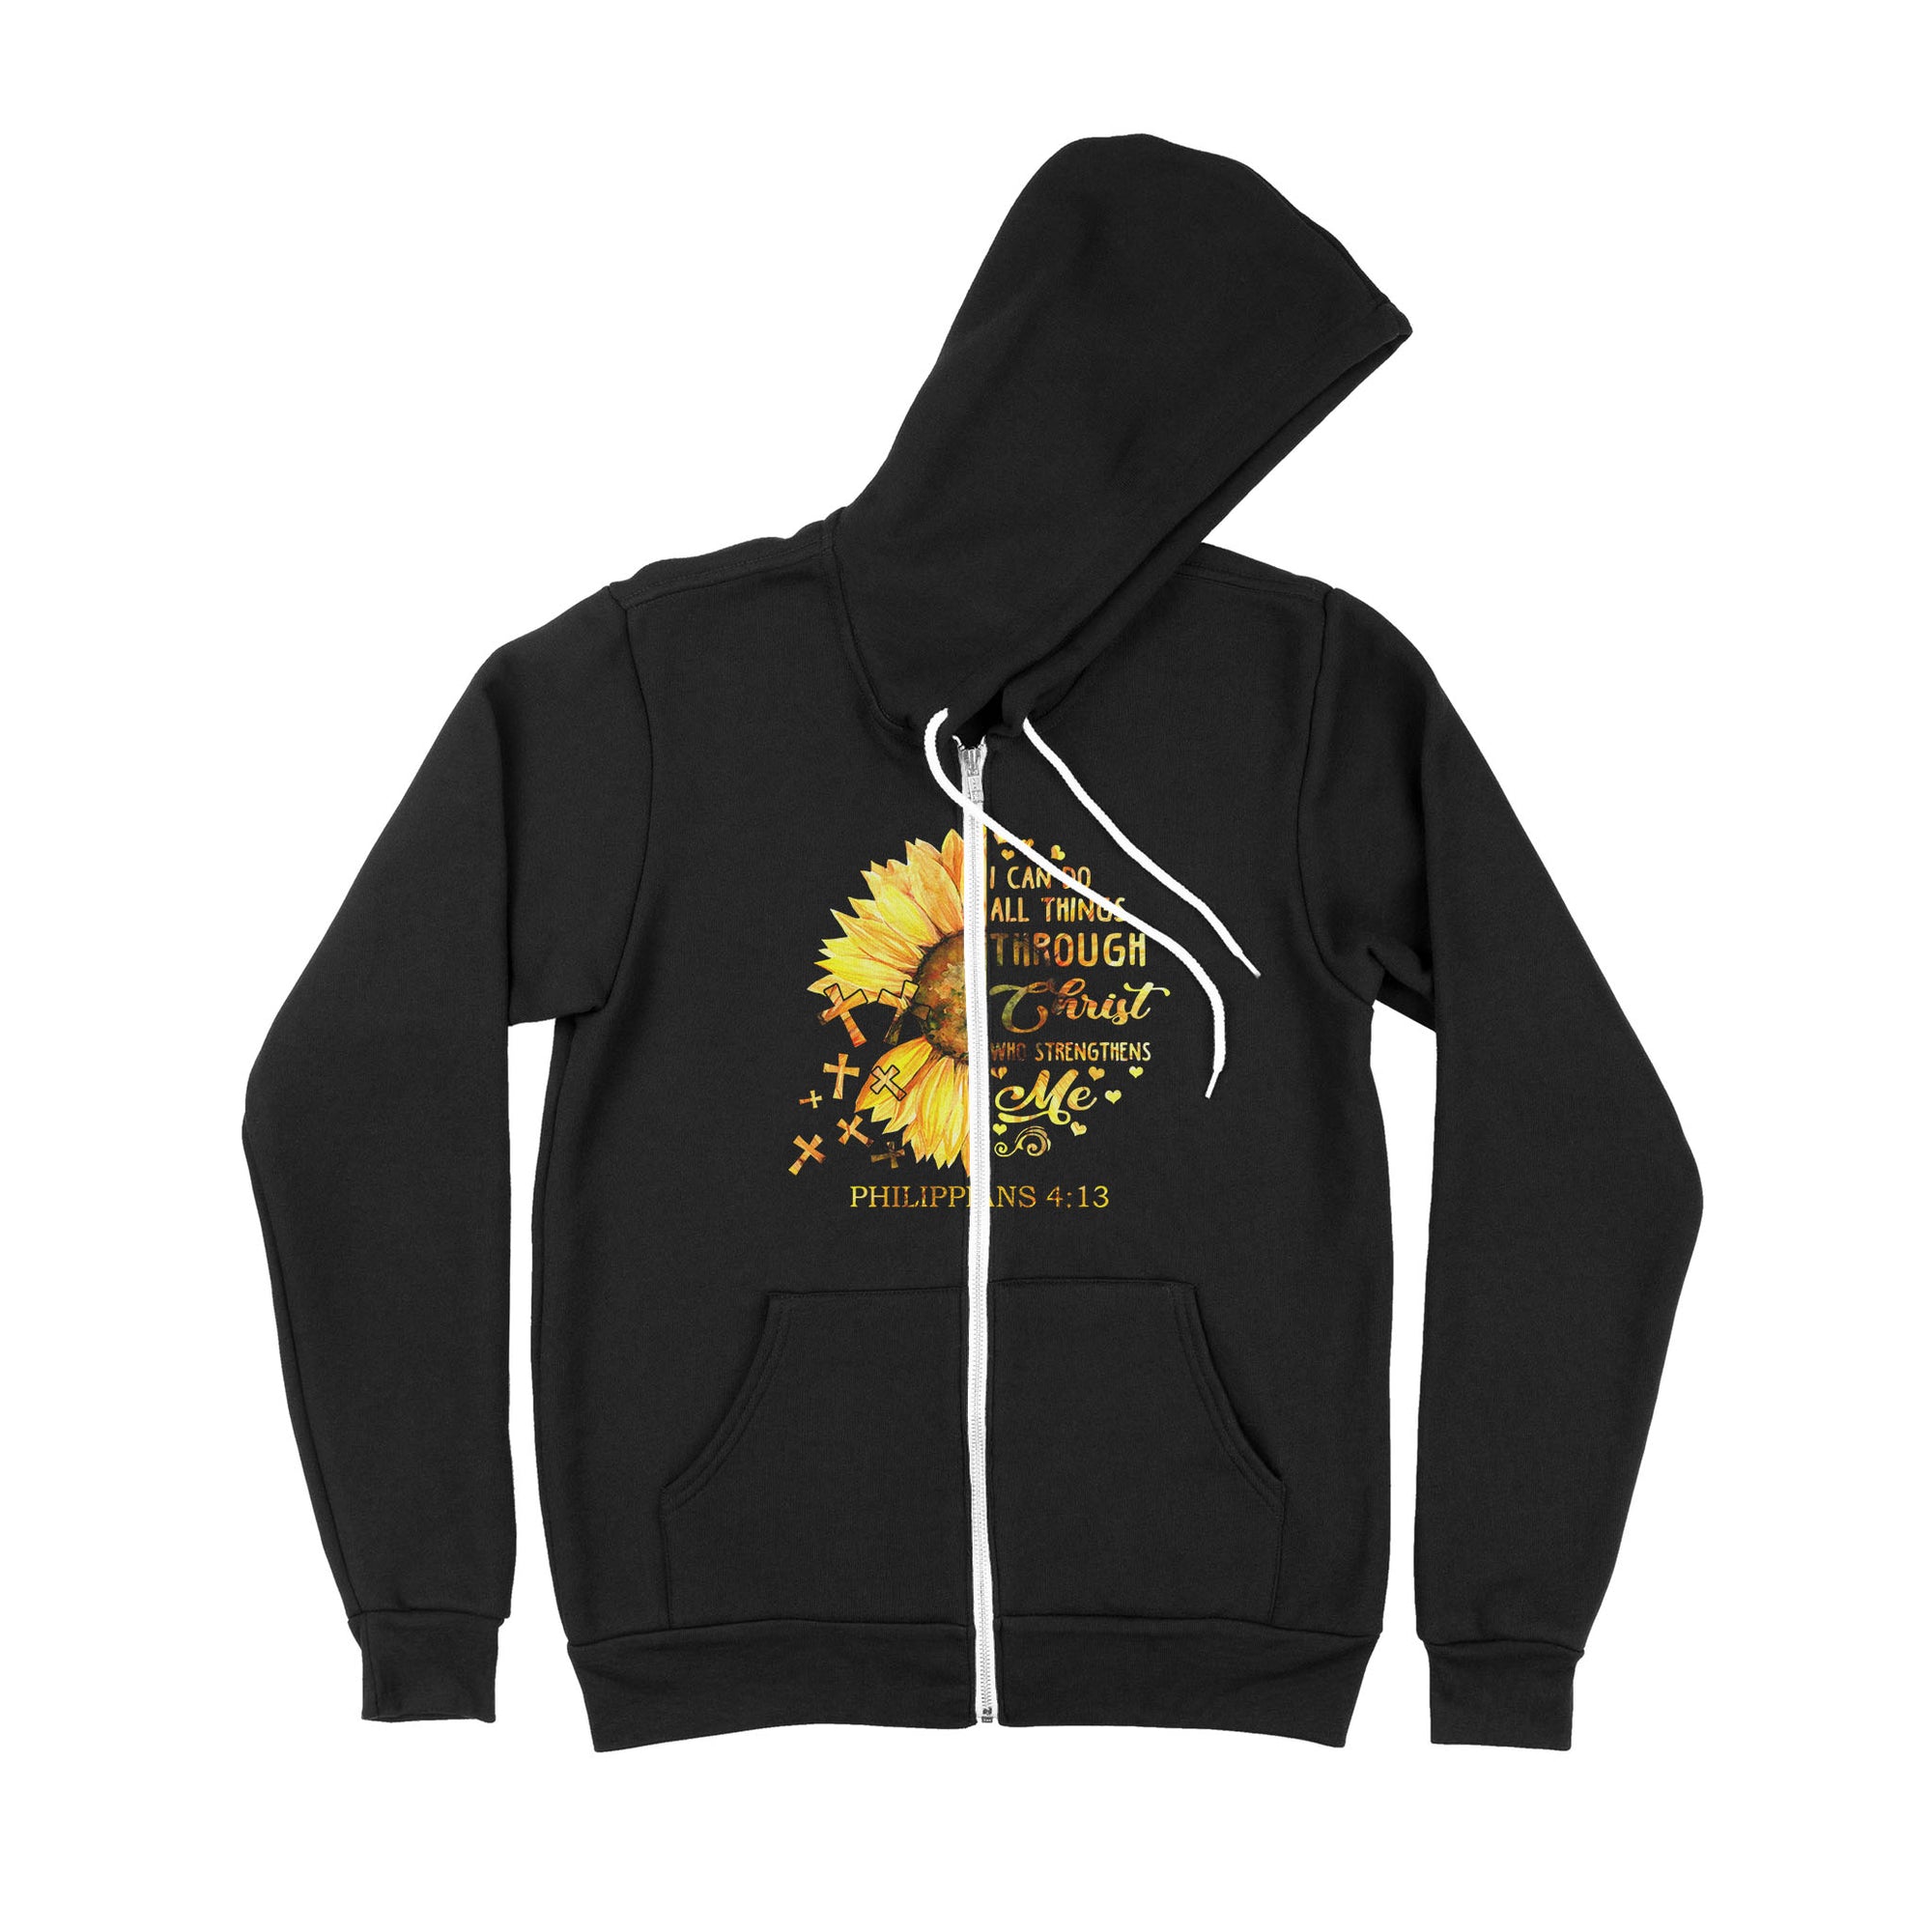 I Can Do All Things Through Christ Who Strengthens Me Daisy Flower - Premium Zip Hoodie